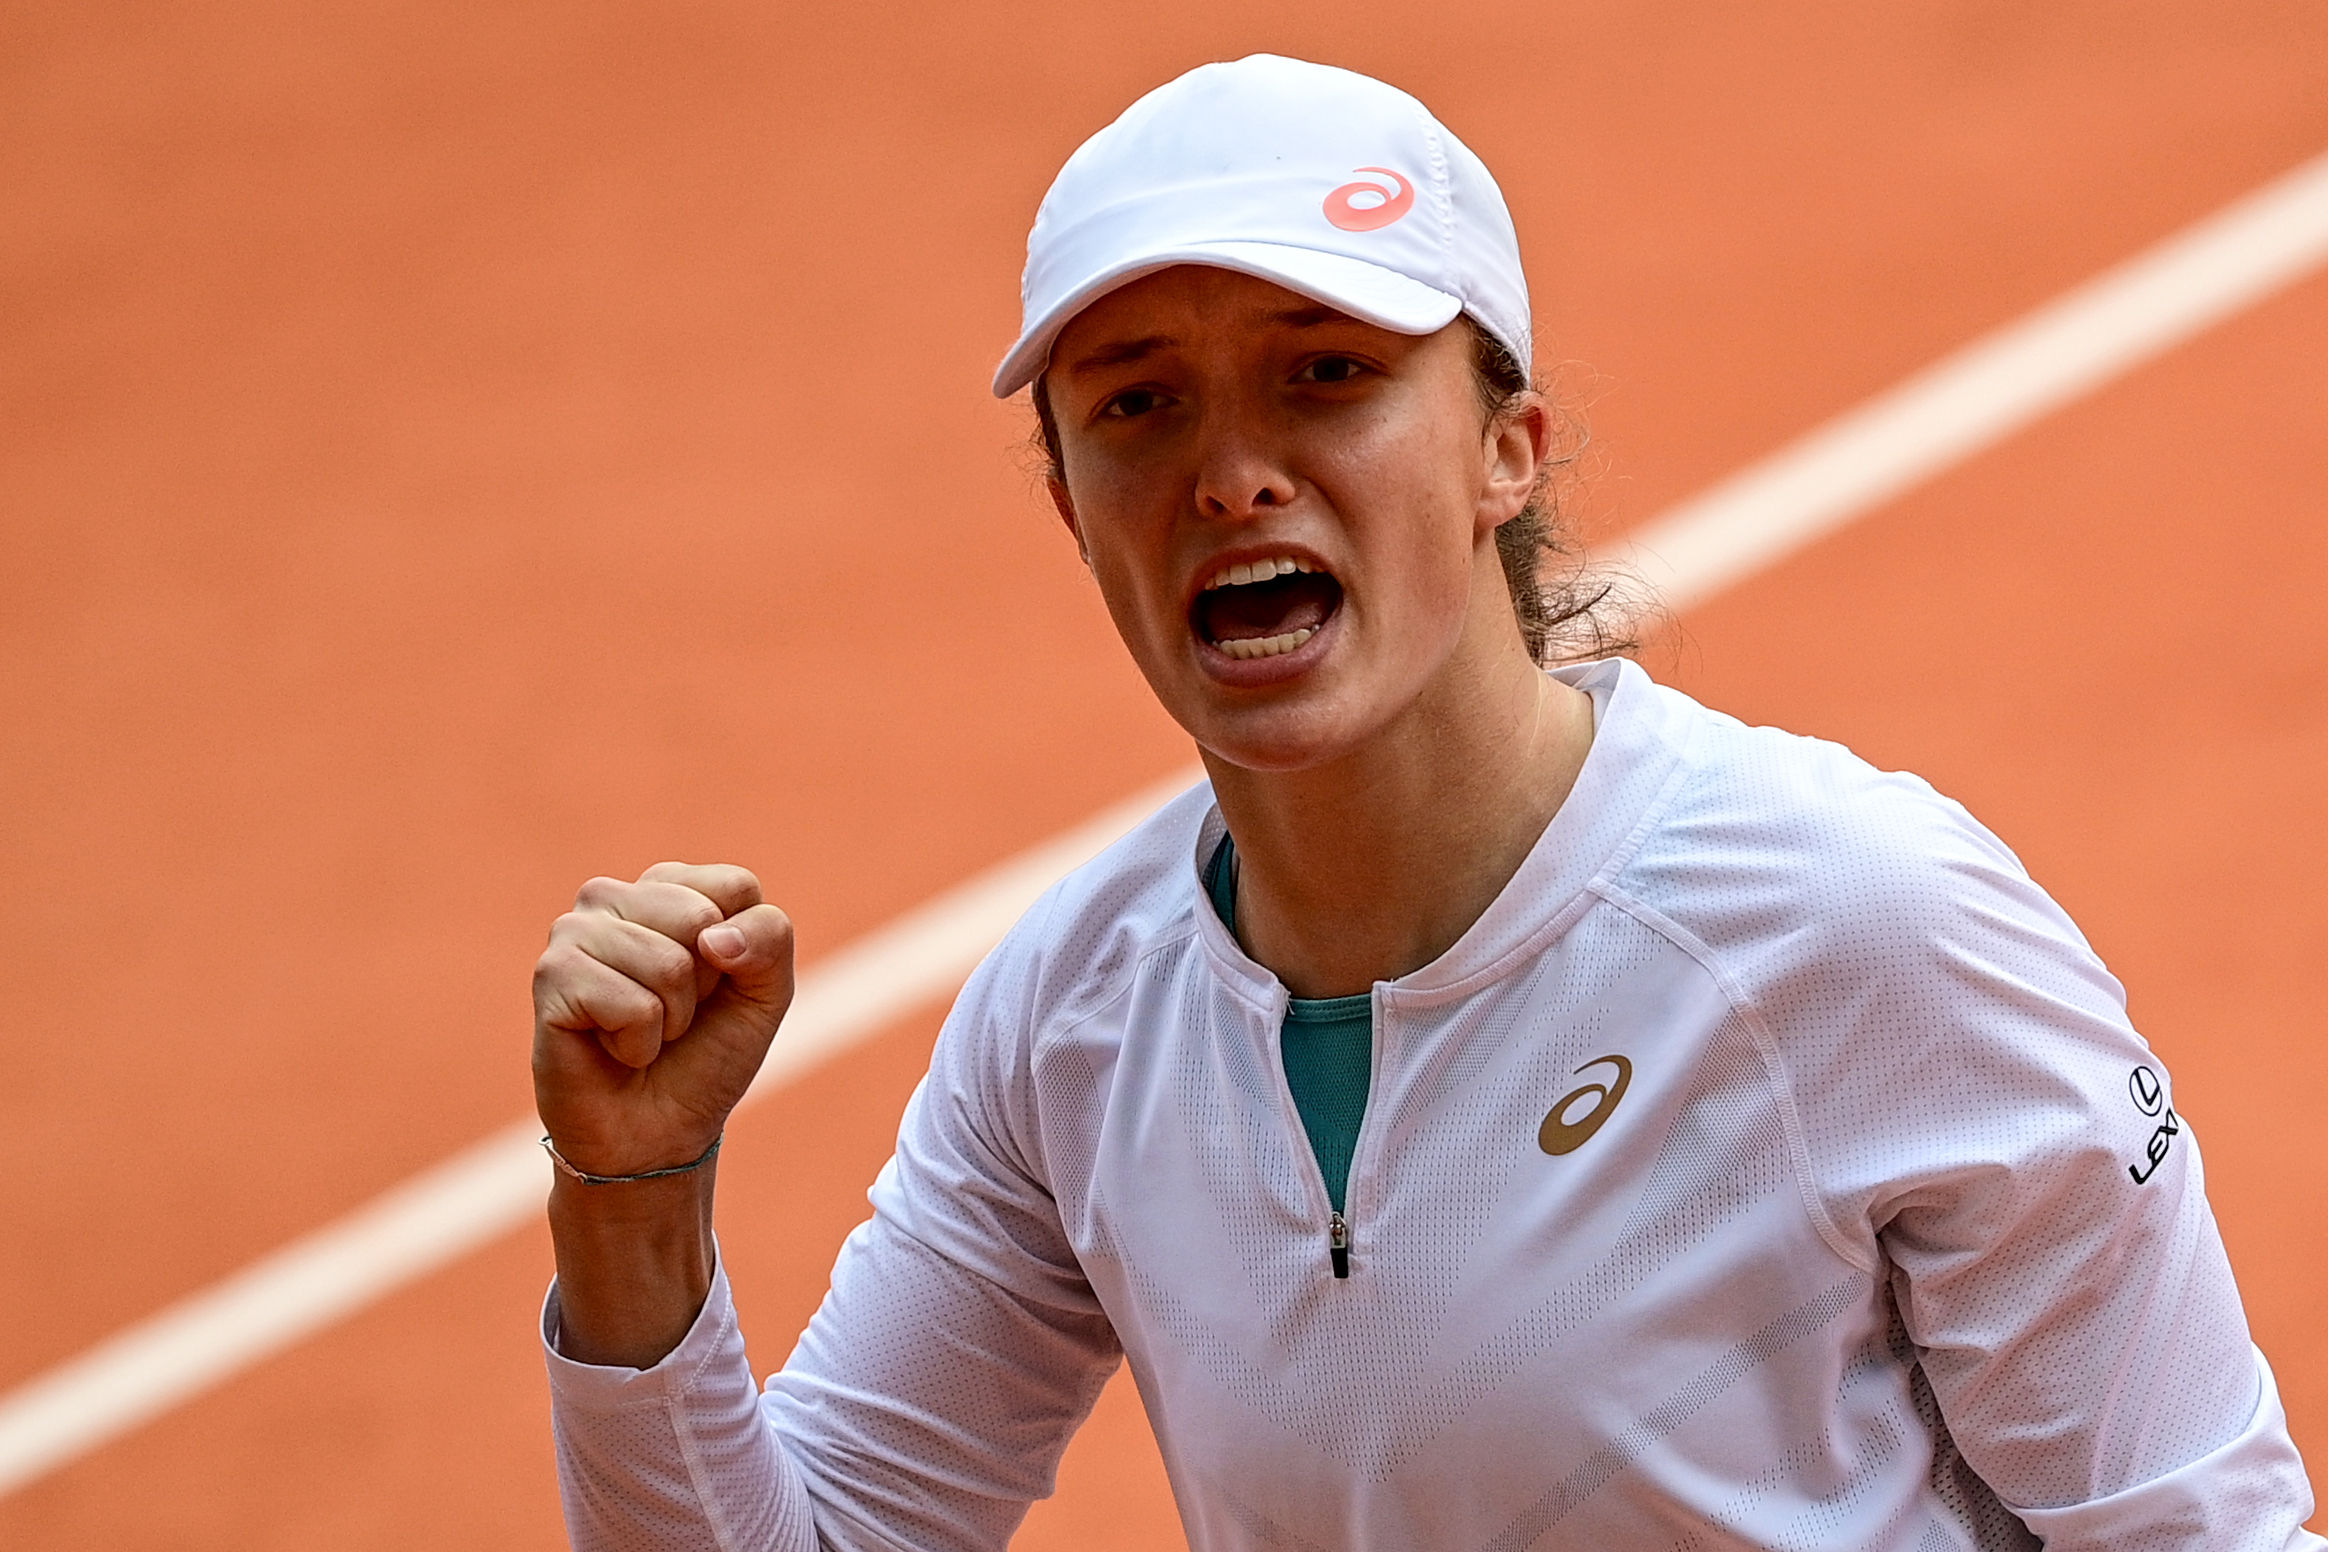 Iga Swiatek wins French Open to become Poland’s first Grand Slam singles champion